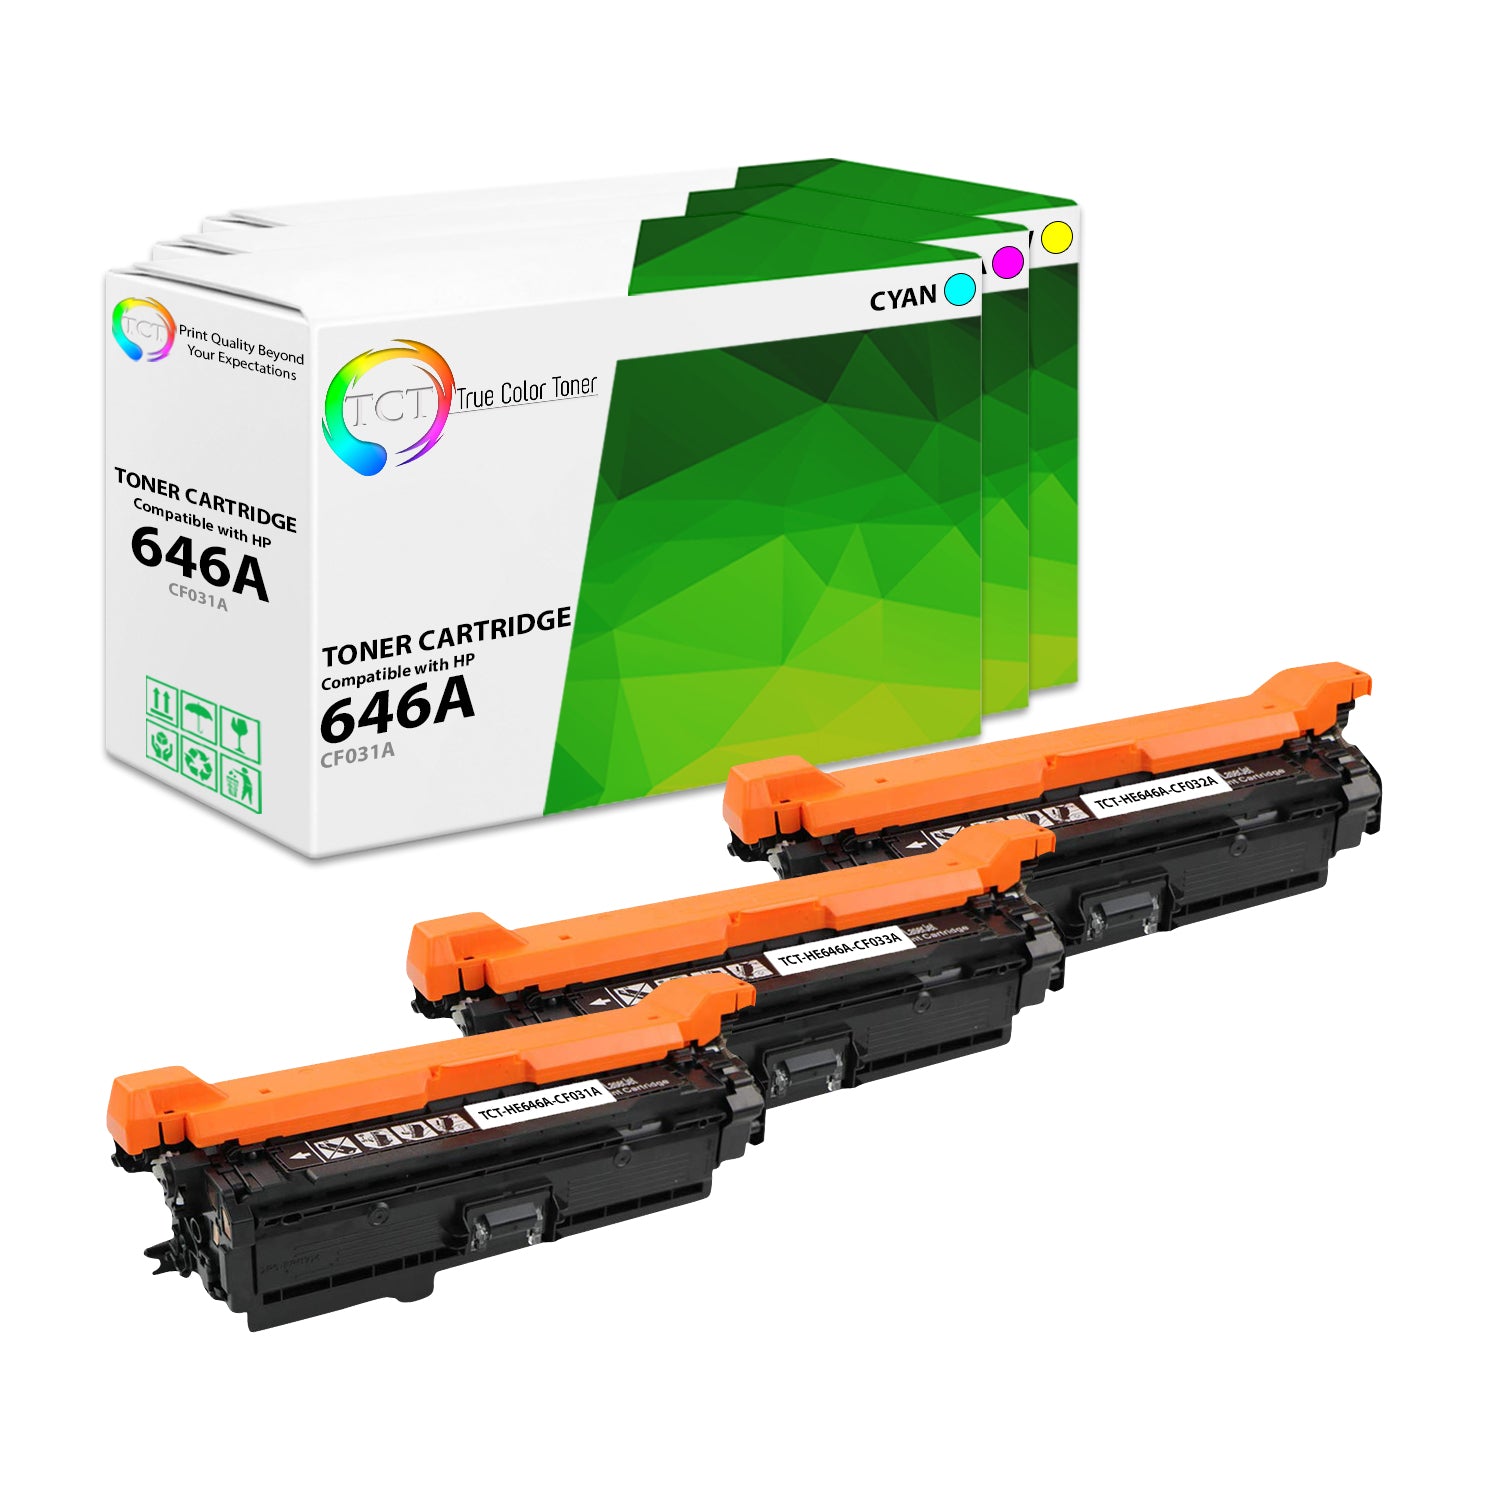 TCT Compatible Toner Cartridge Replacement for the HP 646A Series - 3 Pack (C, M, Y)